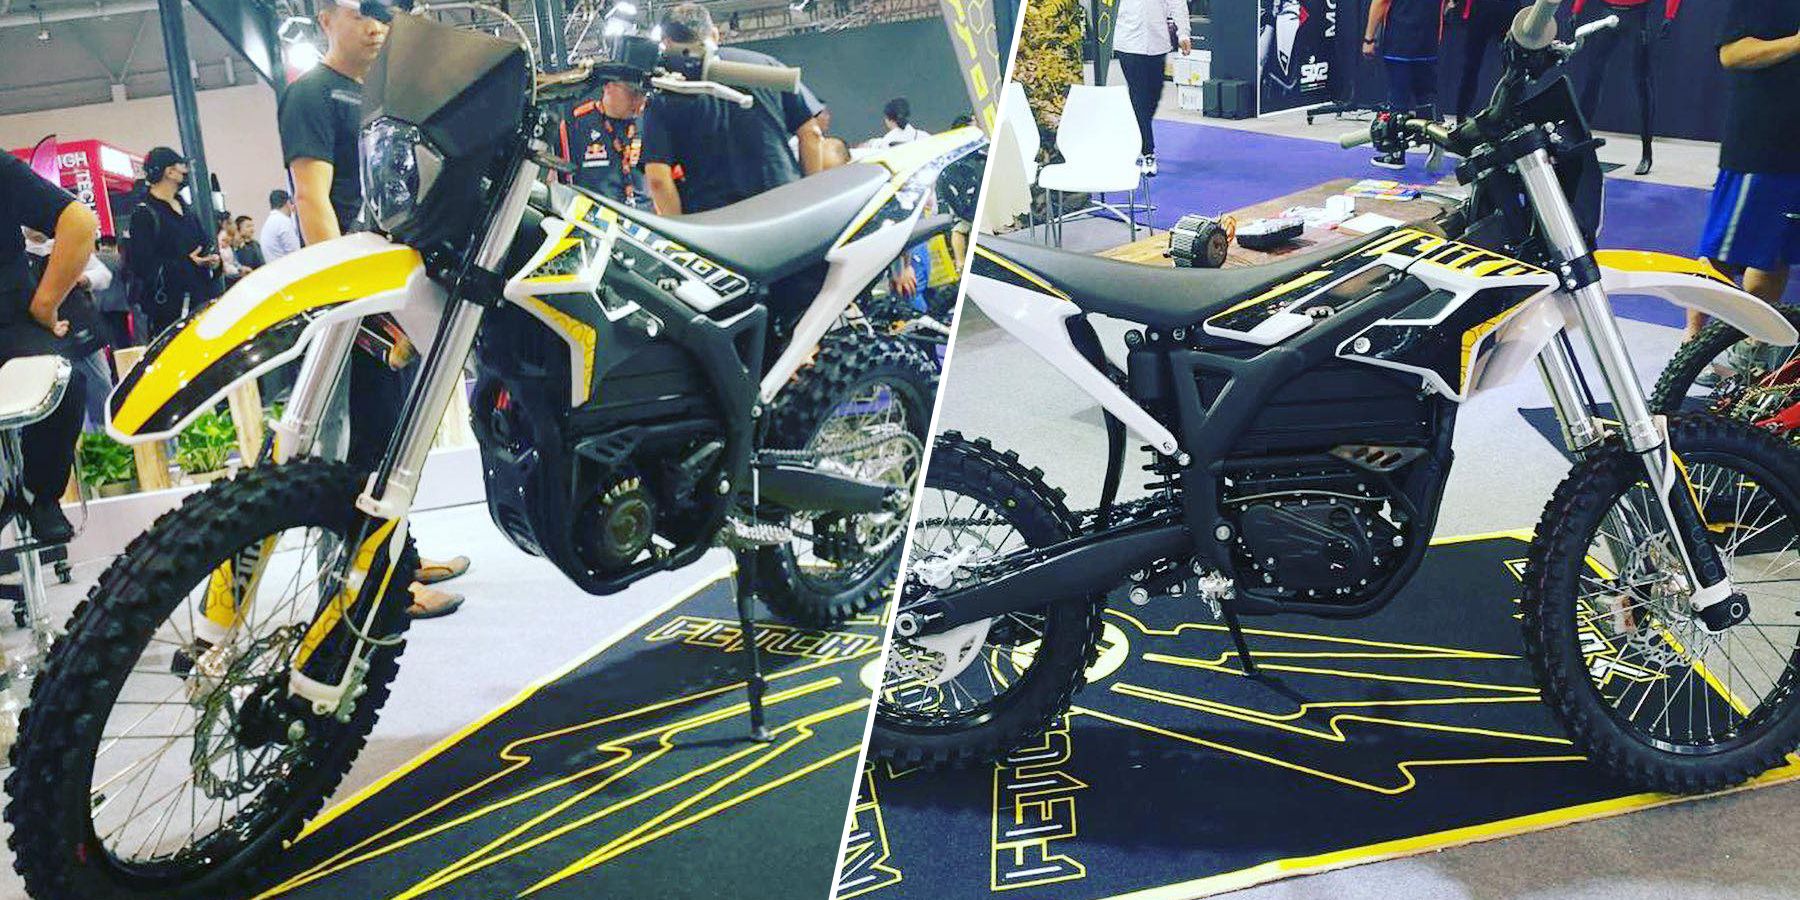 Sur Ron Storm Bee first look: 68 MPH and 30 hp motor, plus more specs